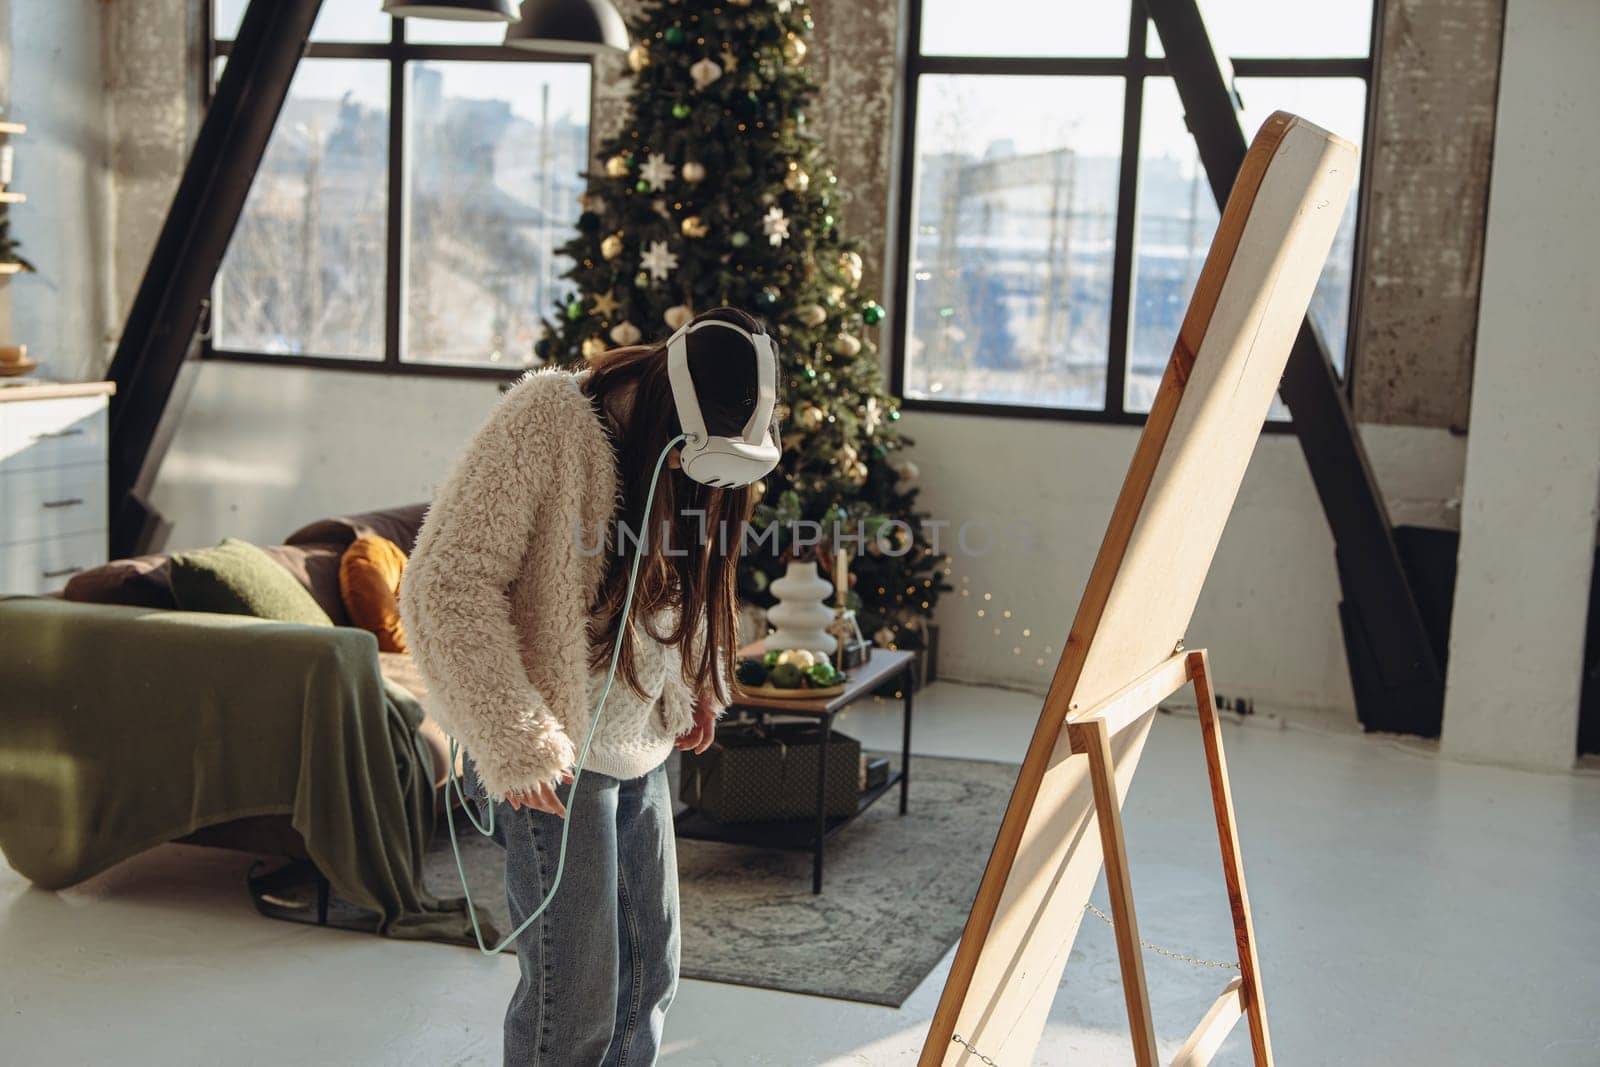 In a Christmas setting, a young woman in light clothing and a virtual reality headset stands in front of the mirror. High quality photo